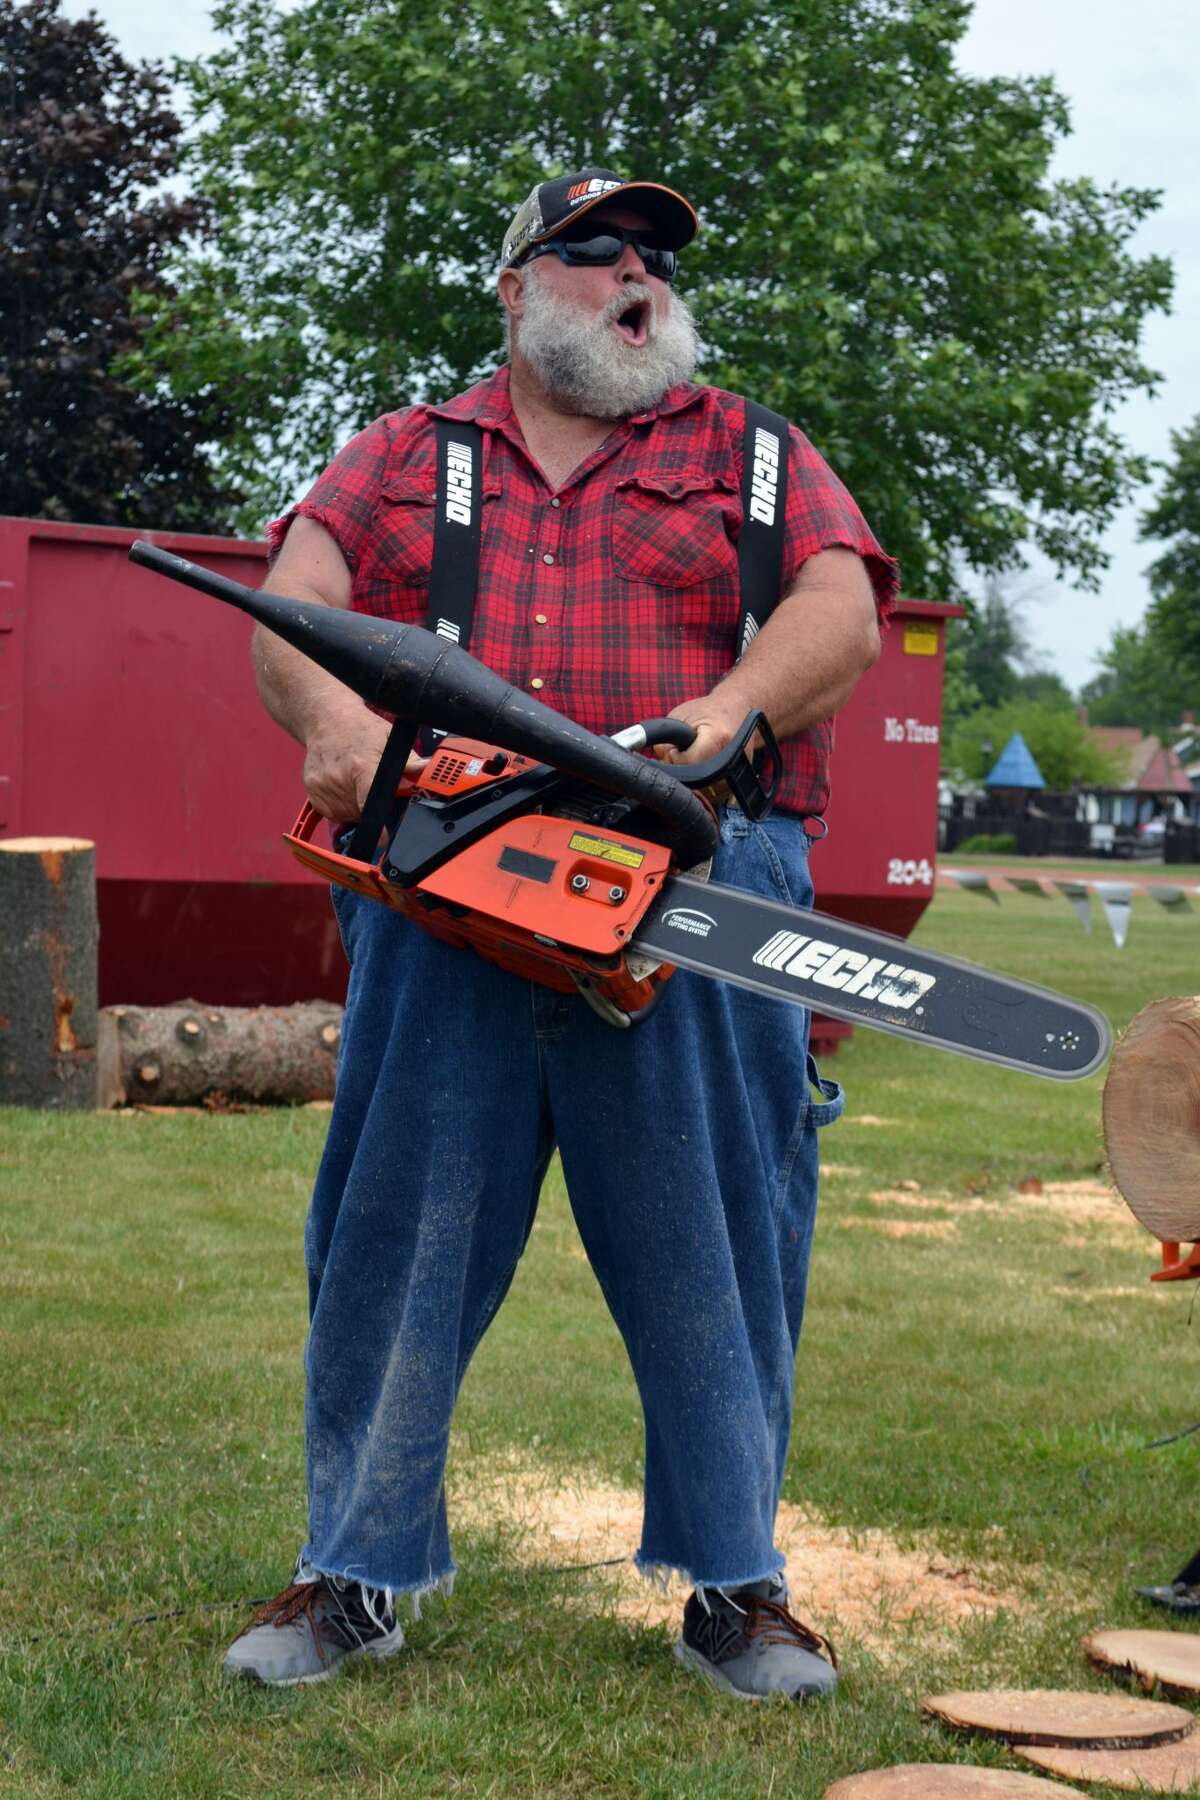    Lee LeCaptain, of The Paul Bunyon Lumberjack Show, fires up his chainsaw for a friendly log-sawing competition against two men with a hand saw – the chainsaw was victorious. The Paul Bunyon show hails all the way from St. Cloud, Florida, and the group has performed all over the U.S. and internationally. The comedic show included a hatchet throwing competition, log-splitting and woodcarving.